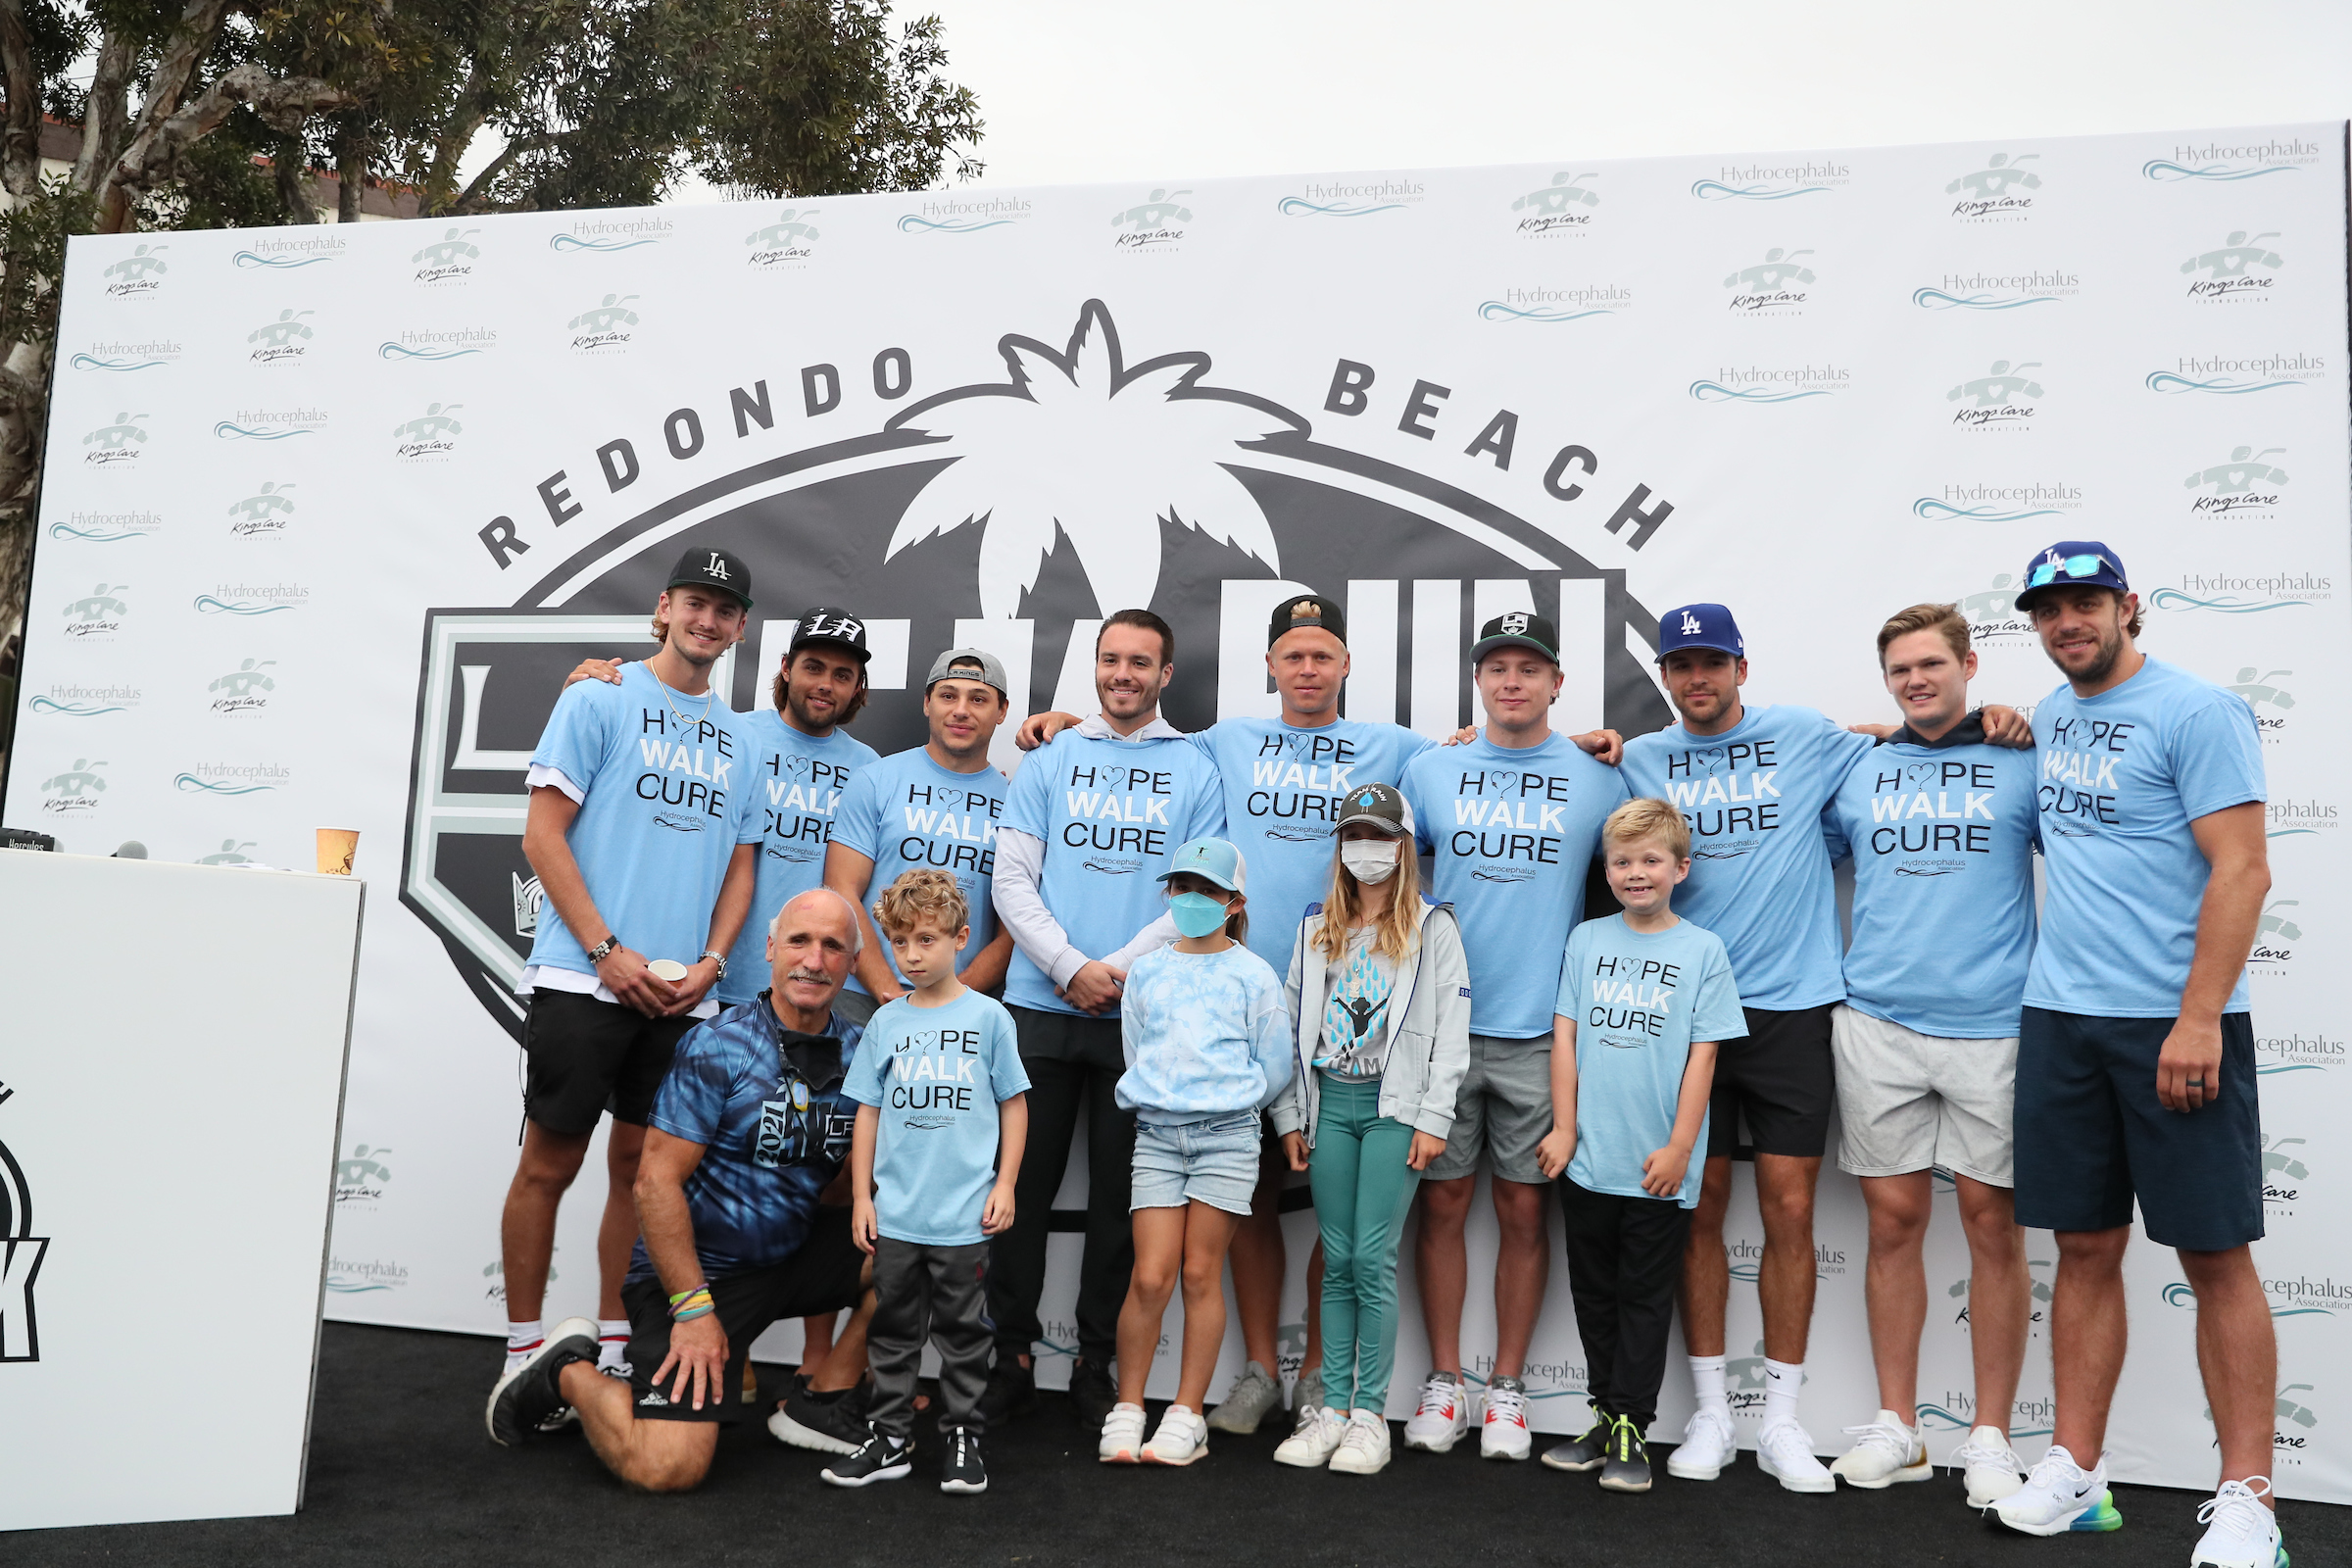 LA Kings players in blue shirts stand in a line with children in front of them for a photo at the LA Kings 5K.